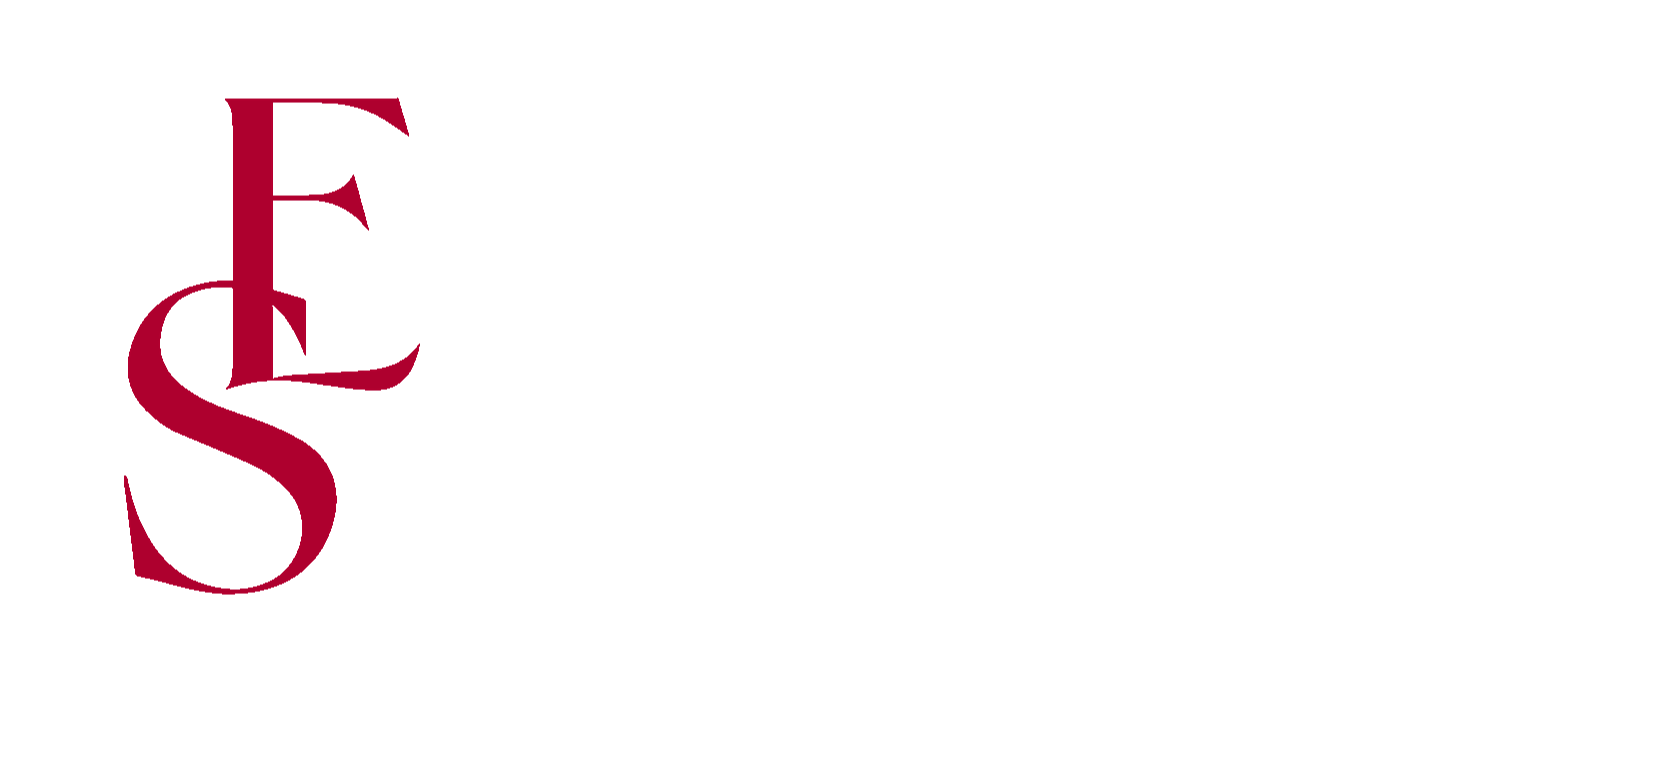 Event Syndicate